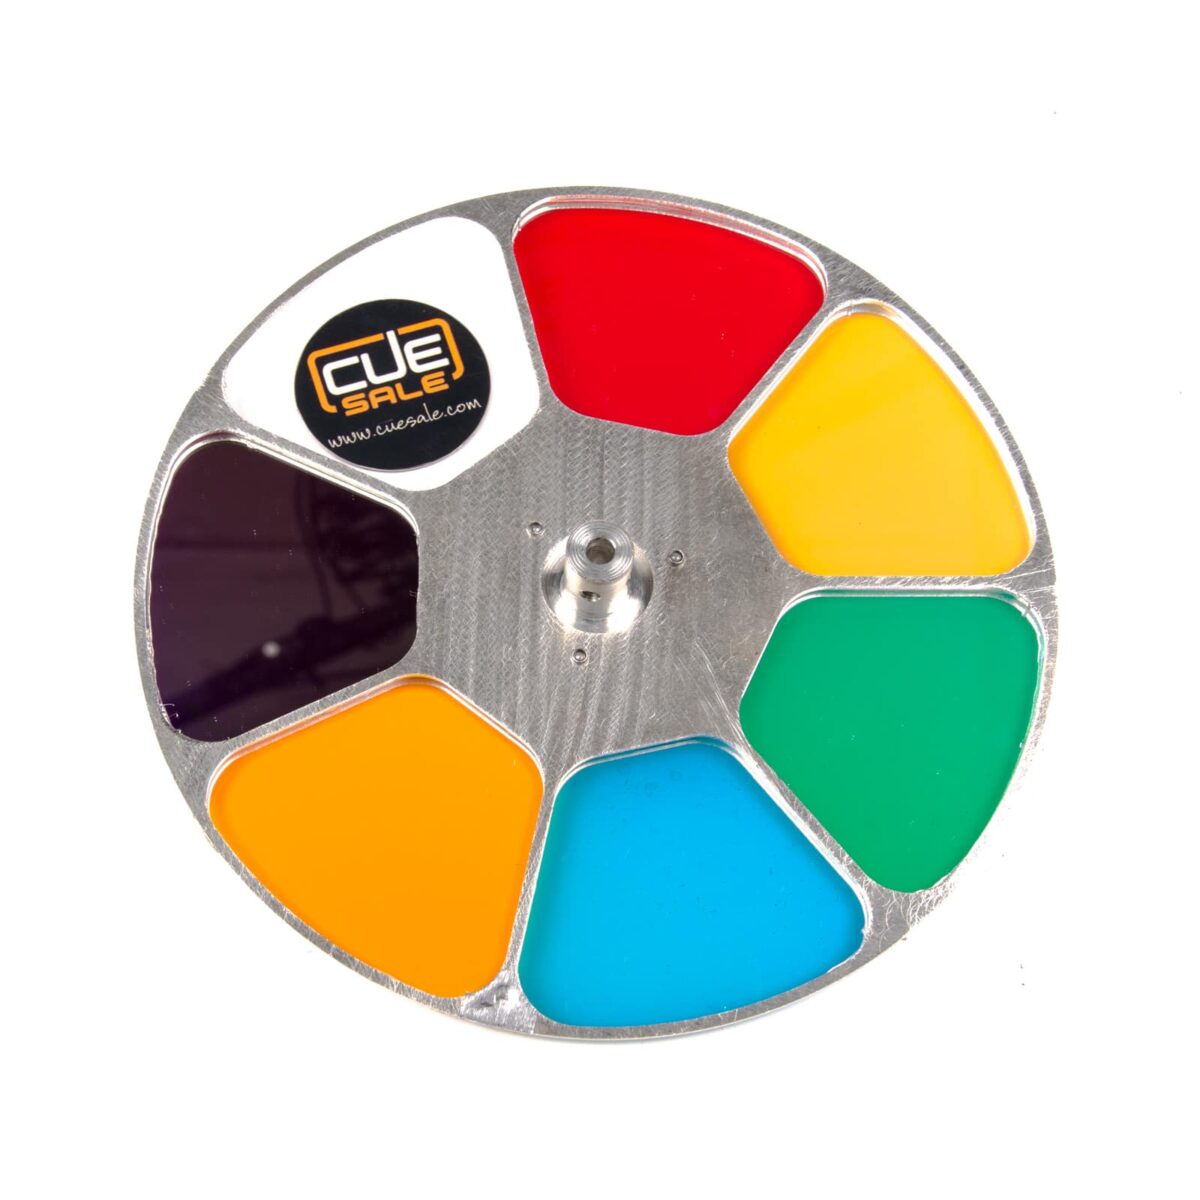 Clay Paky - Colour wheel assembly group